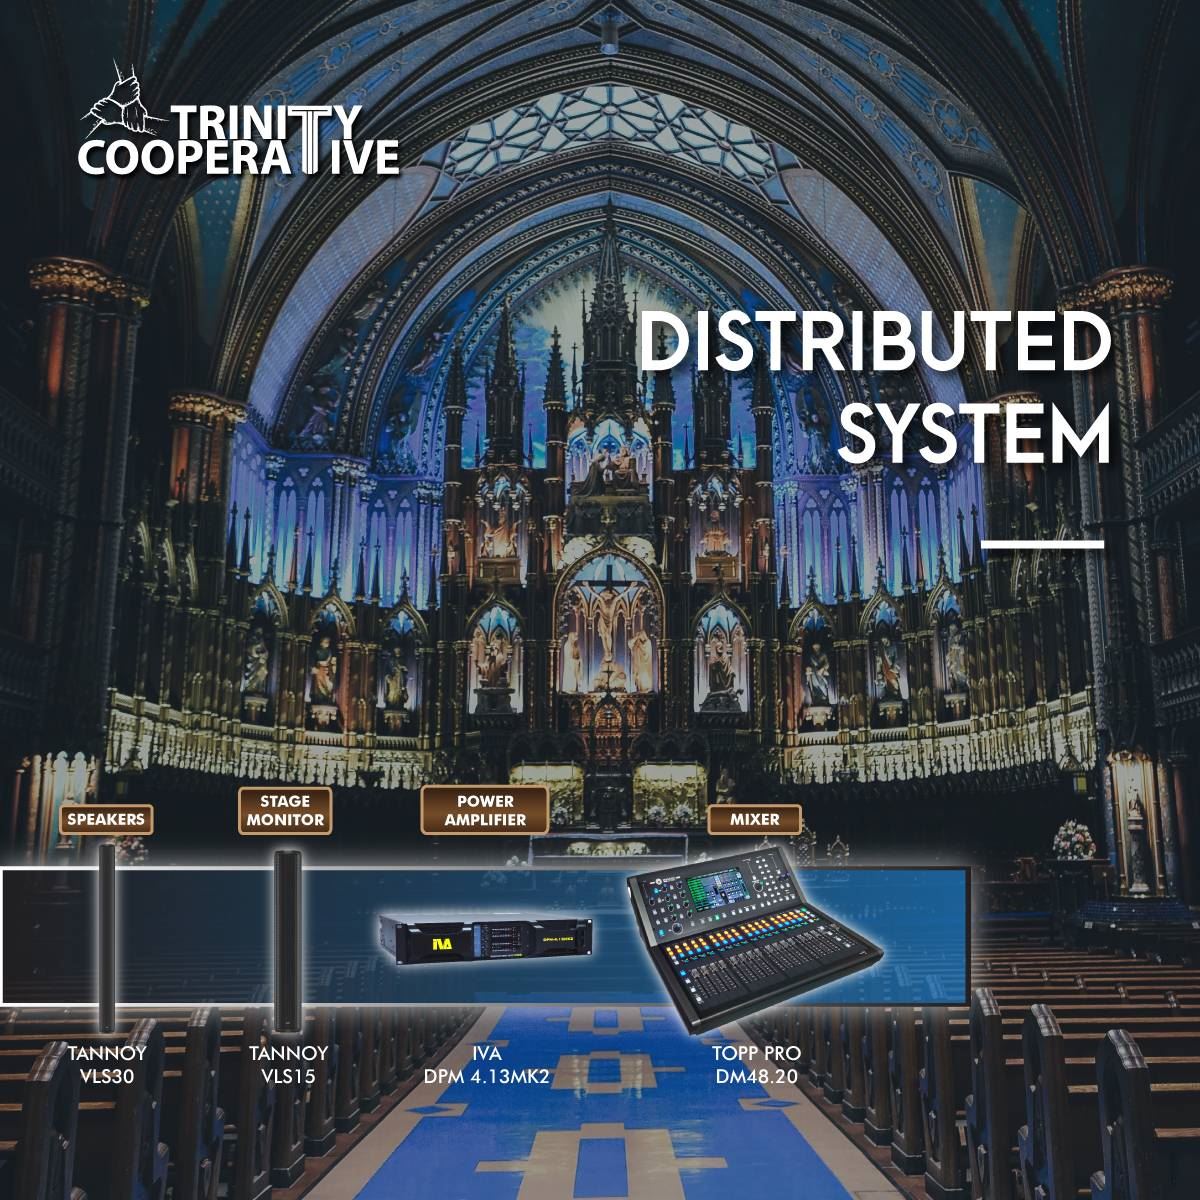 distributed-pa-system-solution-for-reverberation-church-tannoy-vls-30-vls-15-iva-dpm-413mk2-topp-pro-dm4820